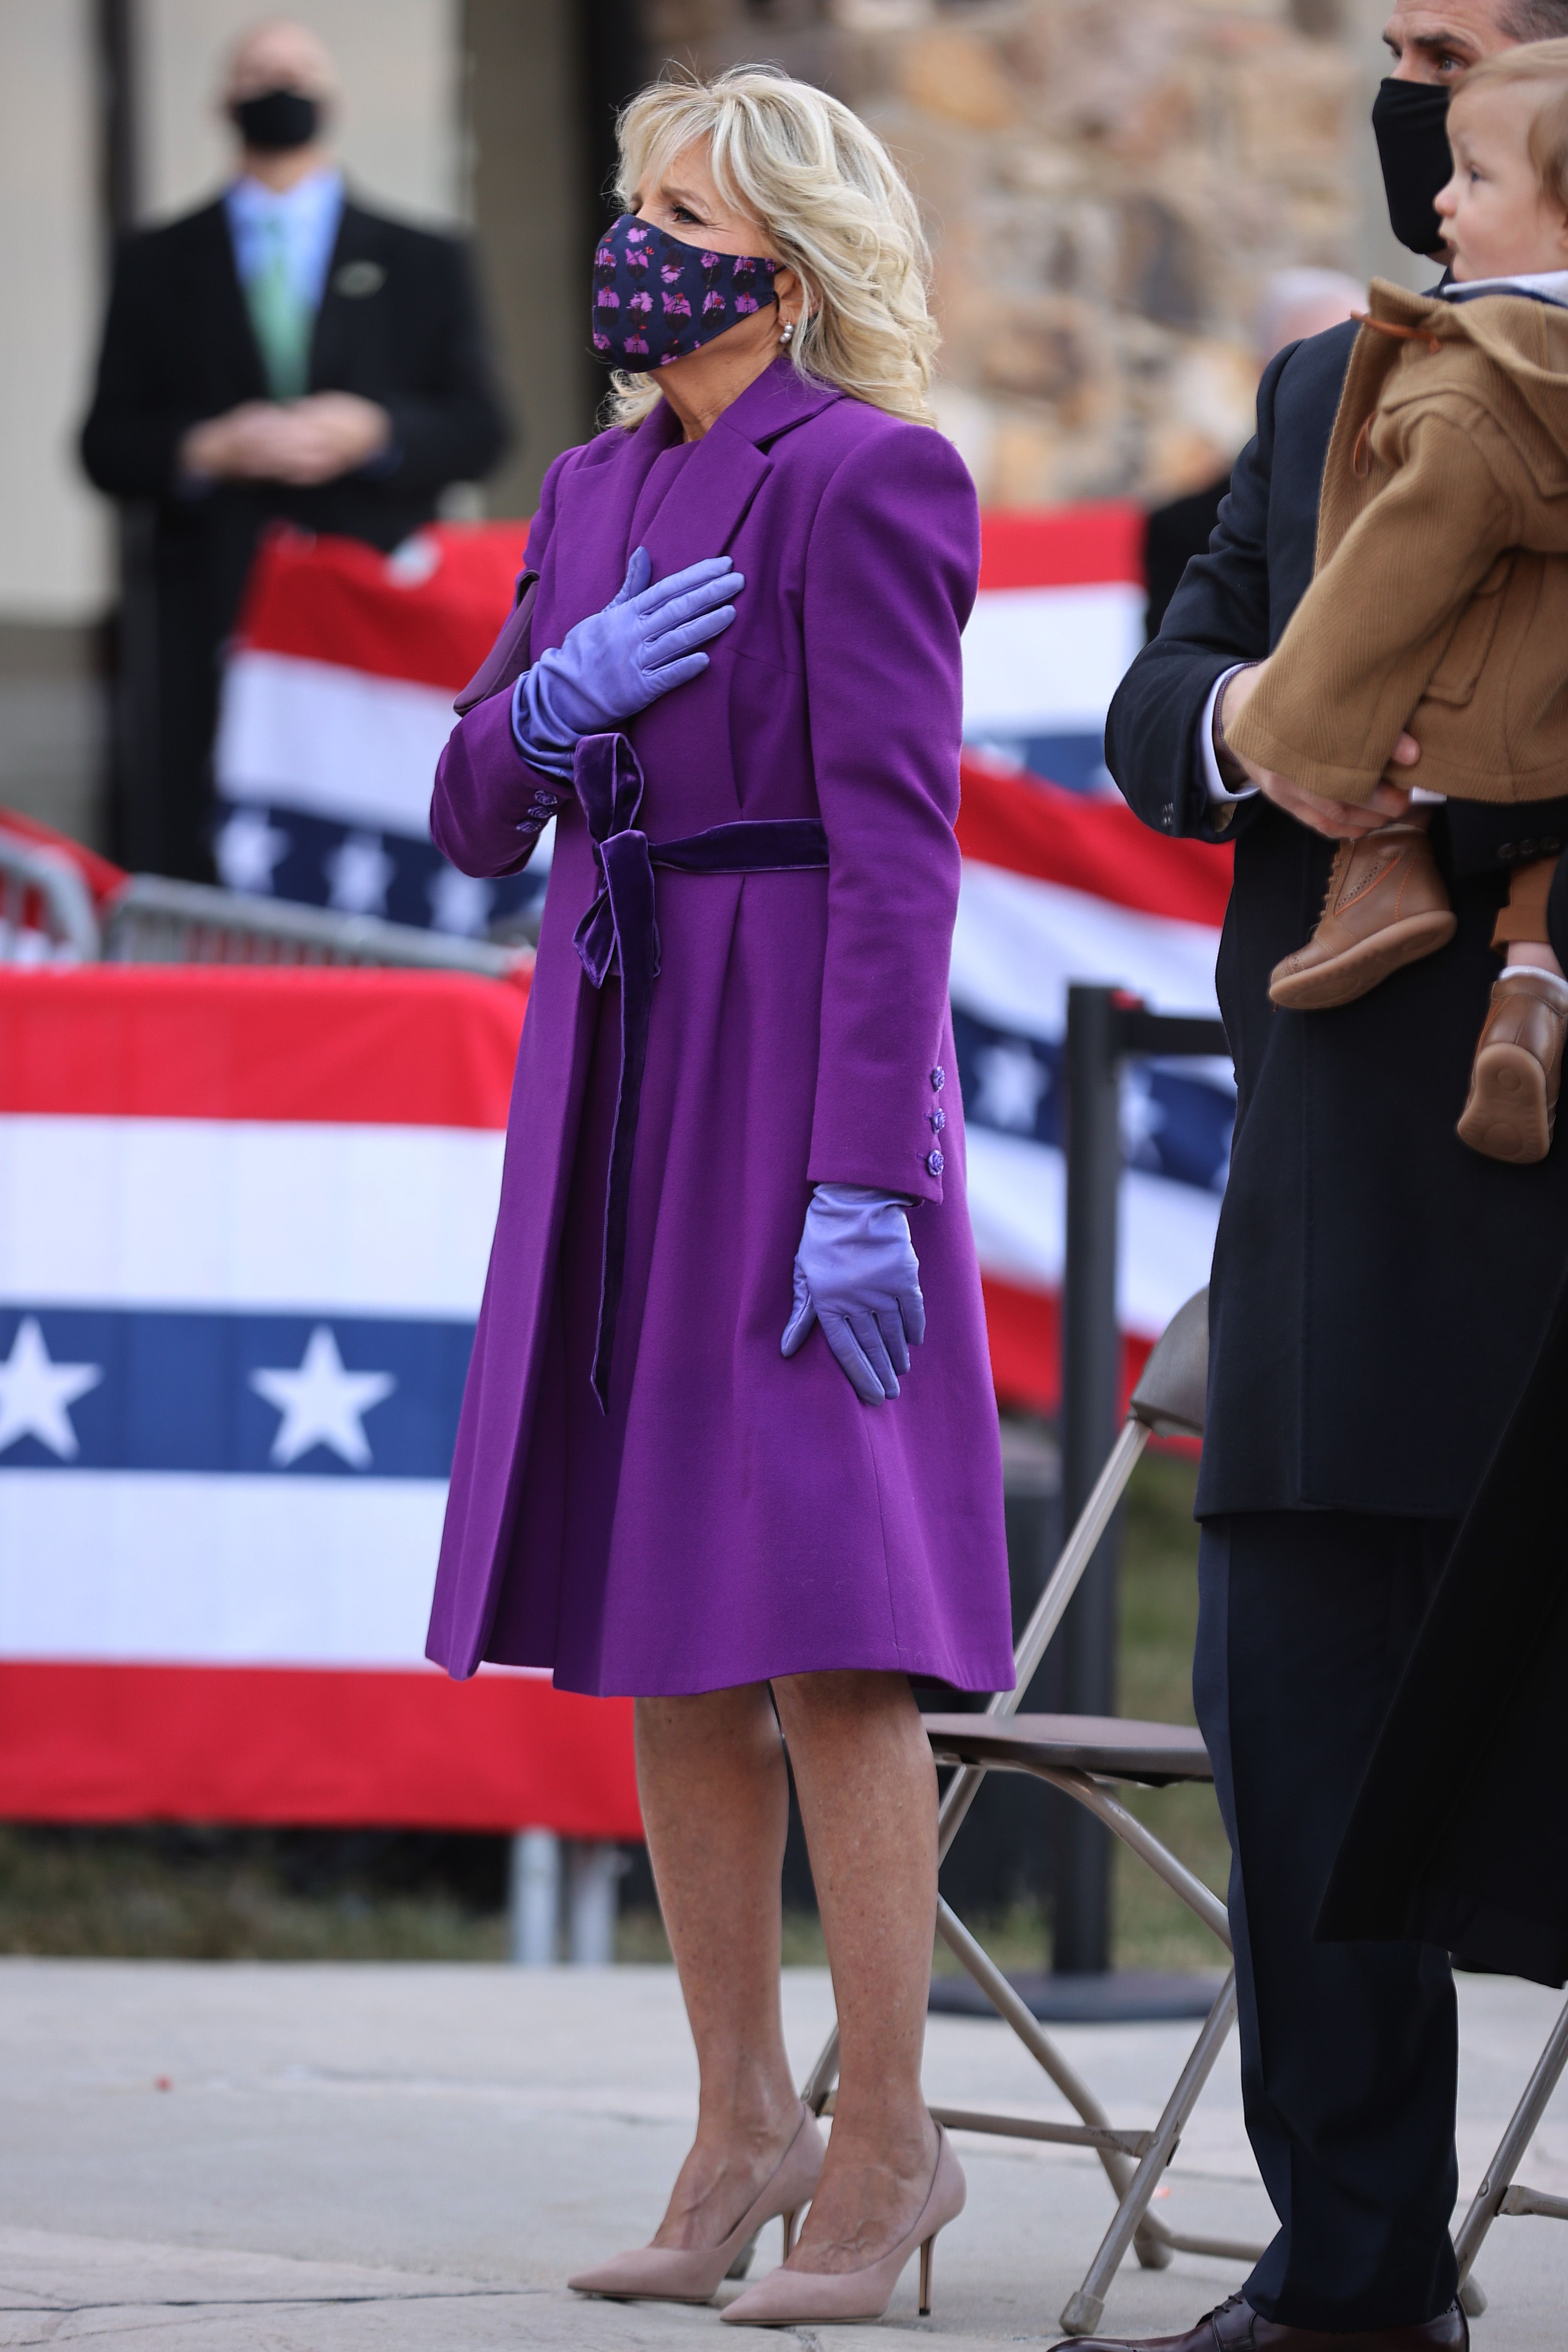 All the best looks from the inauguration